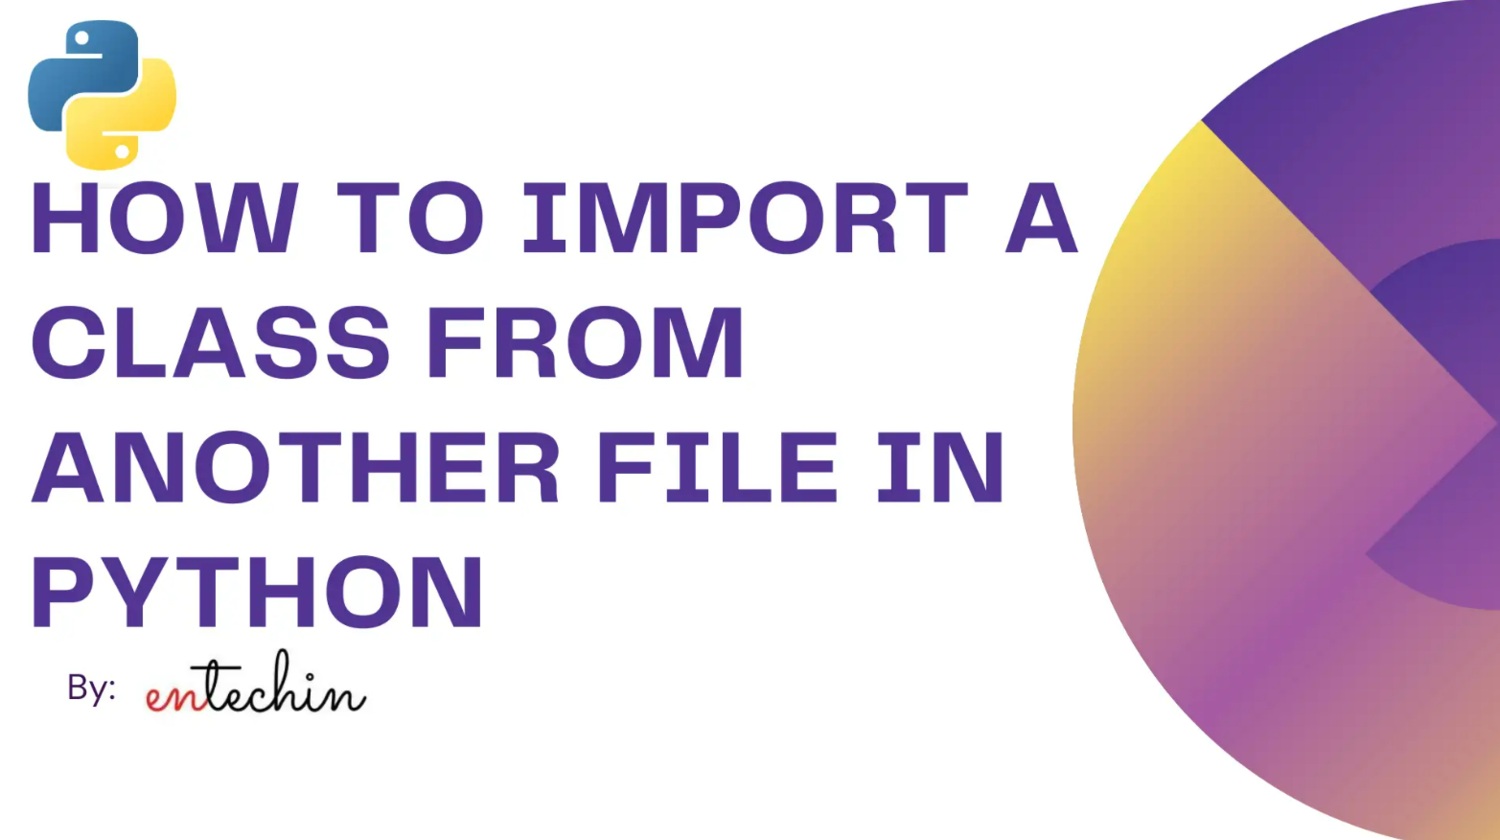 How to import a class from another file in Python